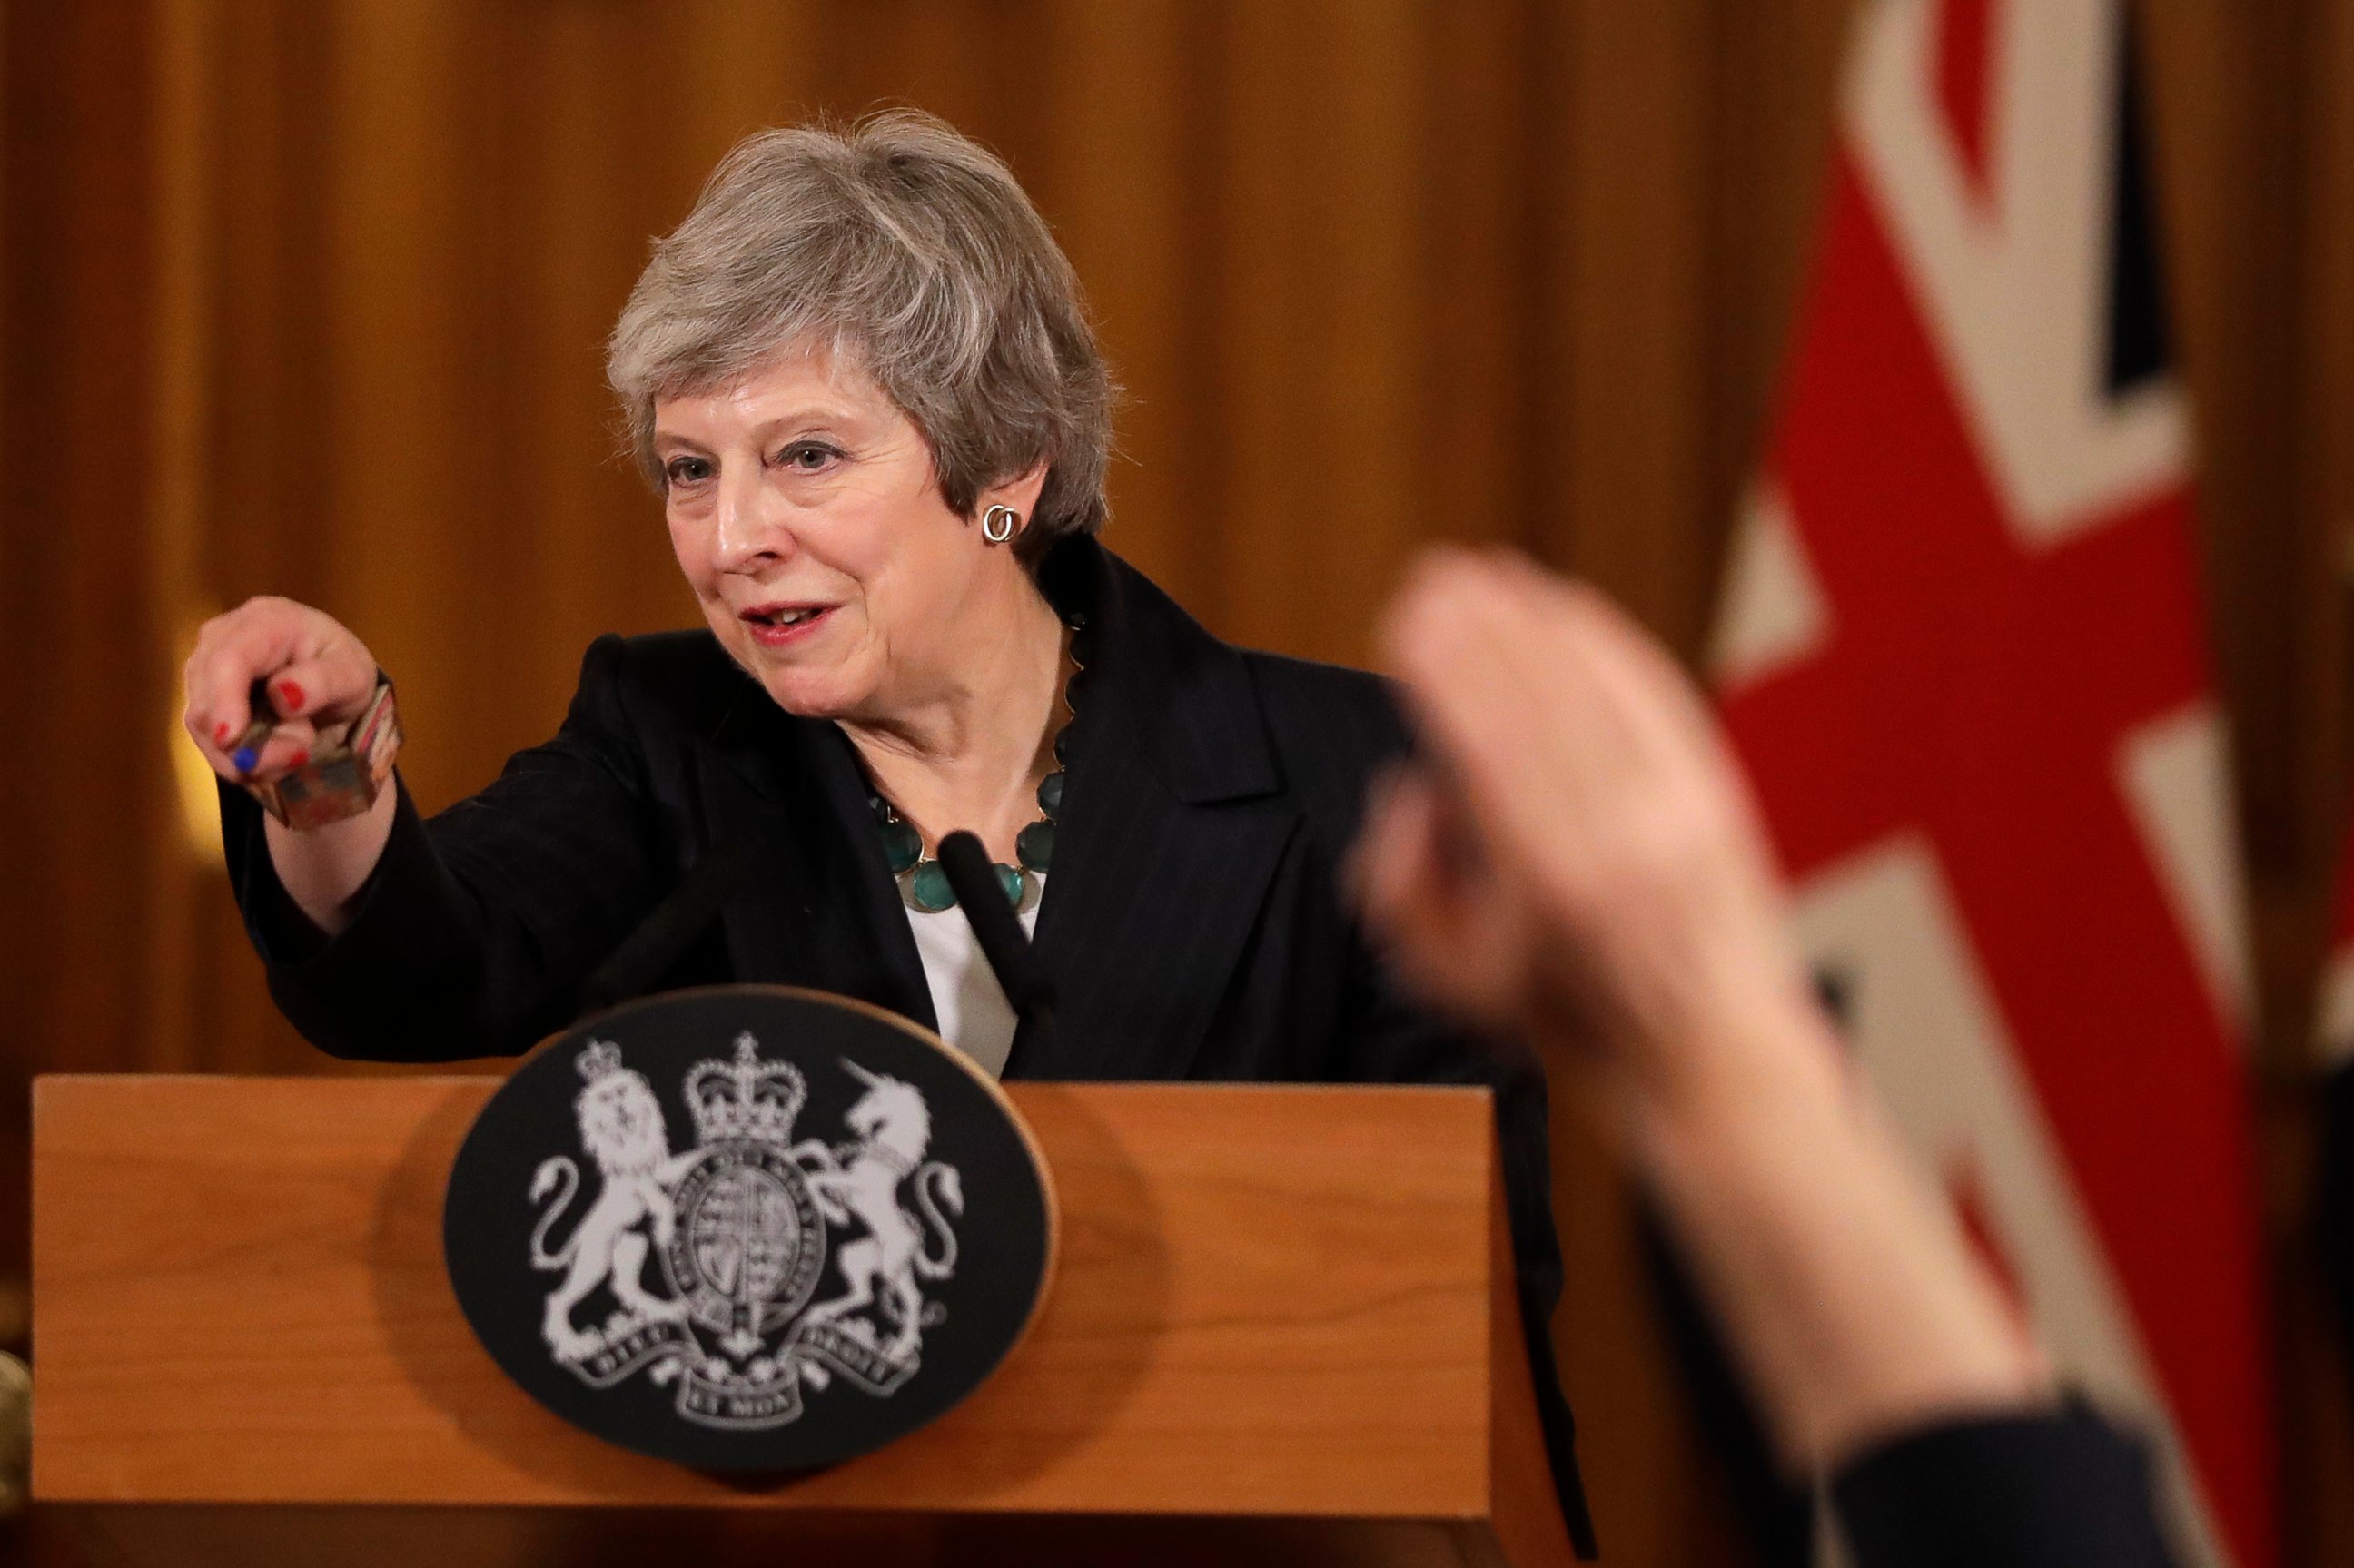 PHOTO: Britain's Prime Minister Theresa May takes questions during a press conference inside 10 Downing Street in London, Thursday, Nov. 15, 2018.